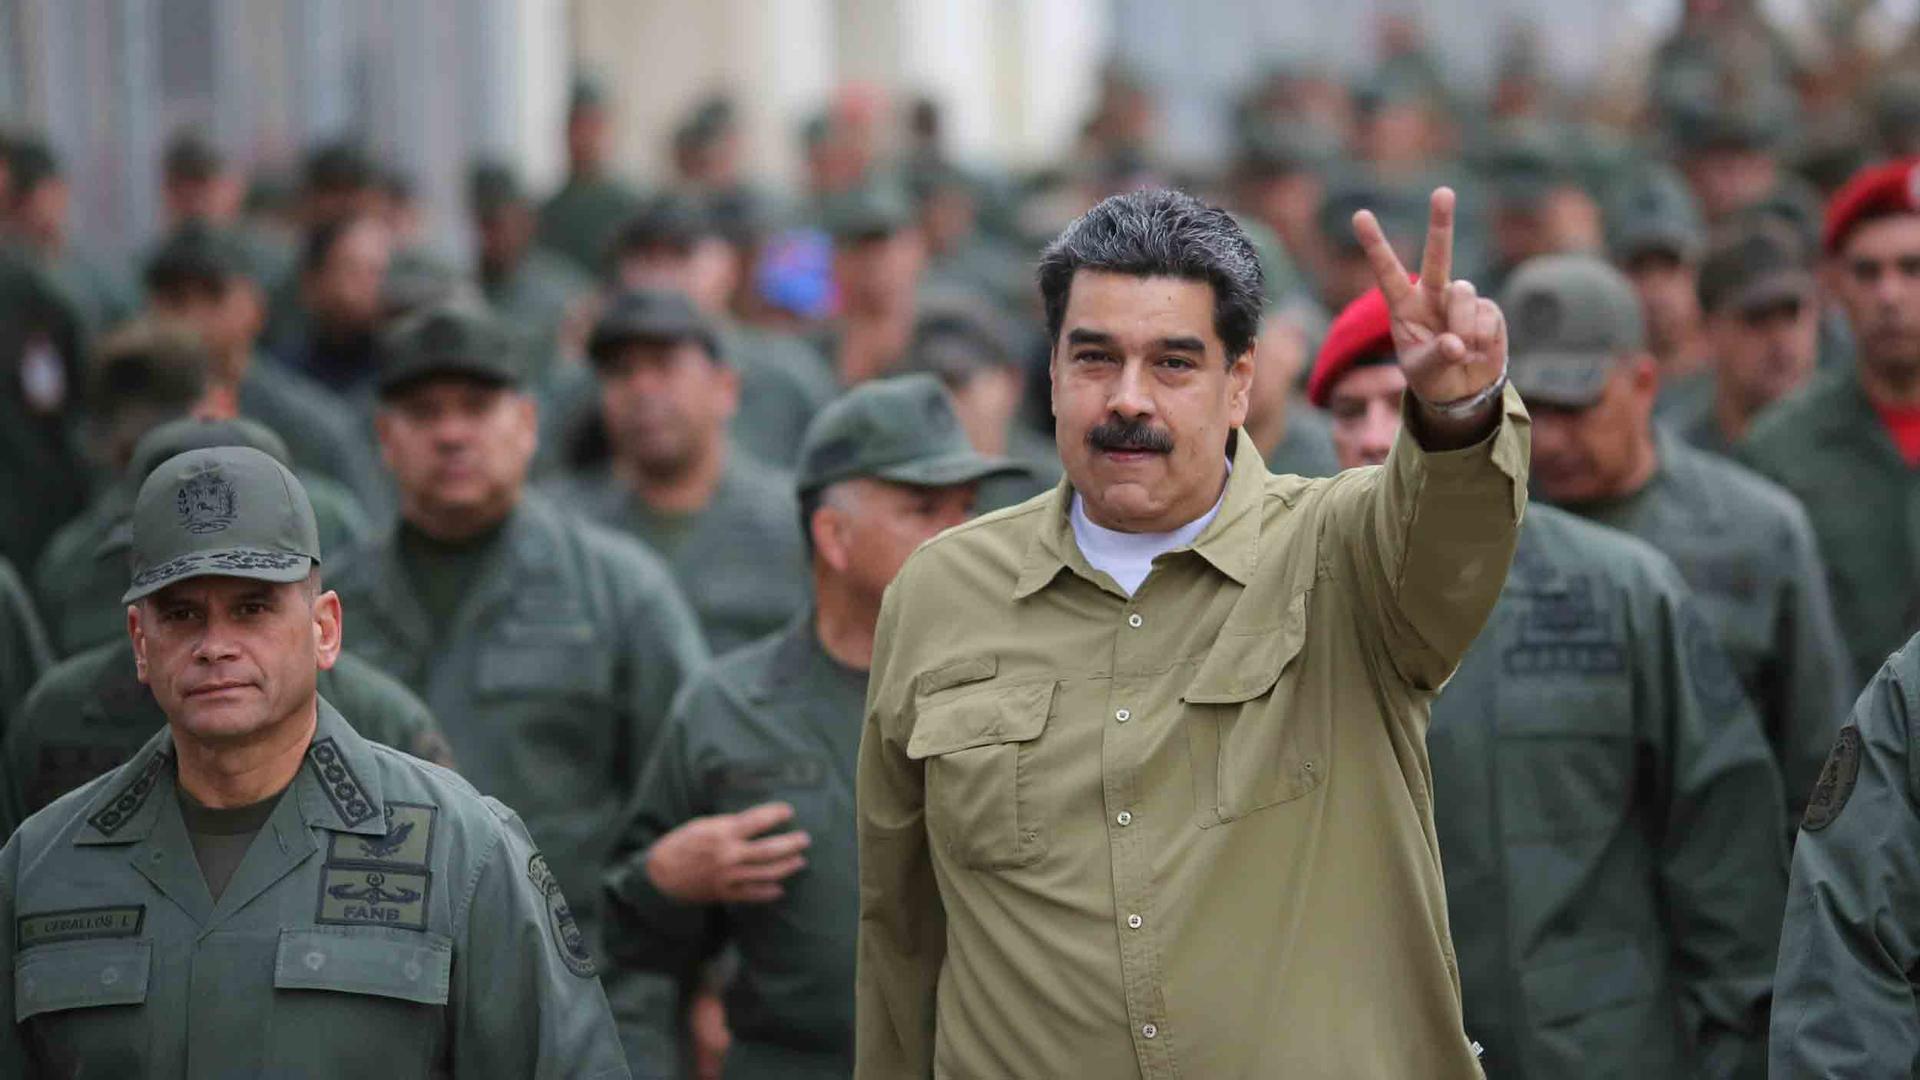 Nicolas Maduro holds up two fingers as he is surrounded by men in military uniforms.